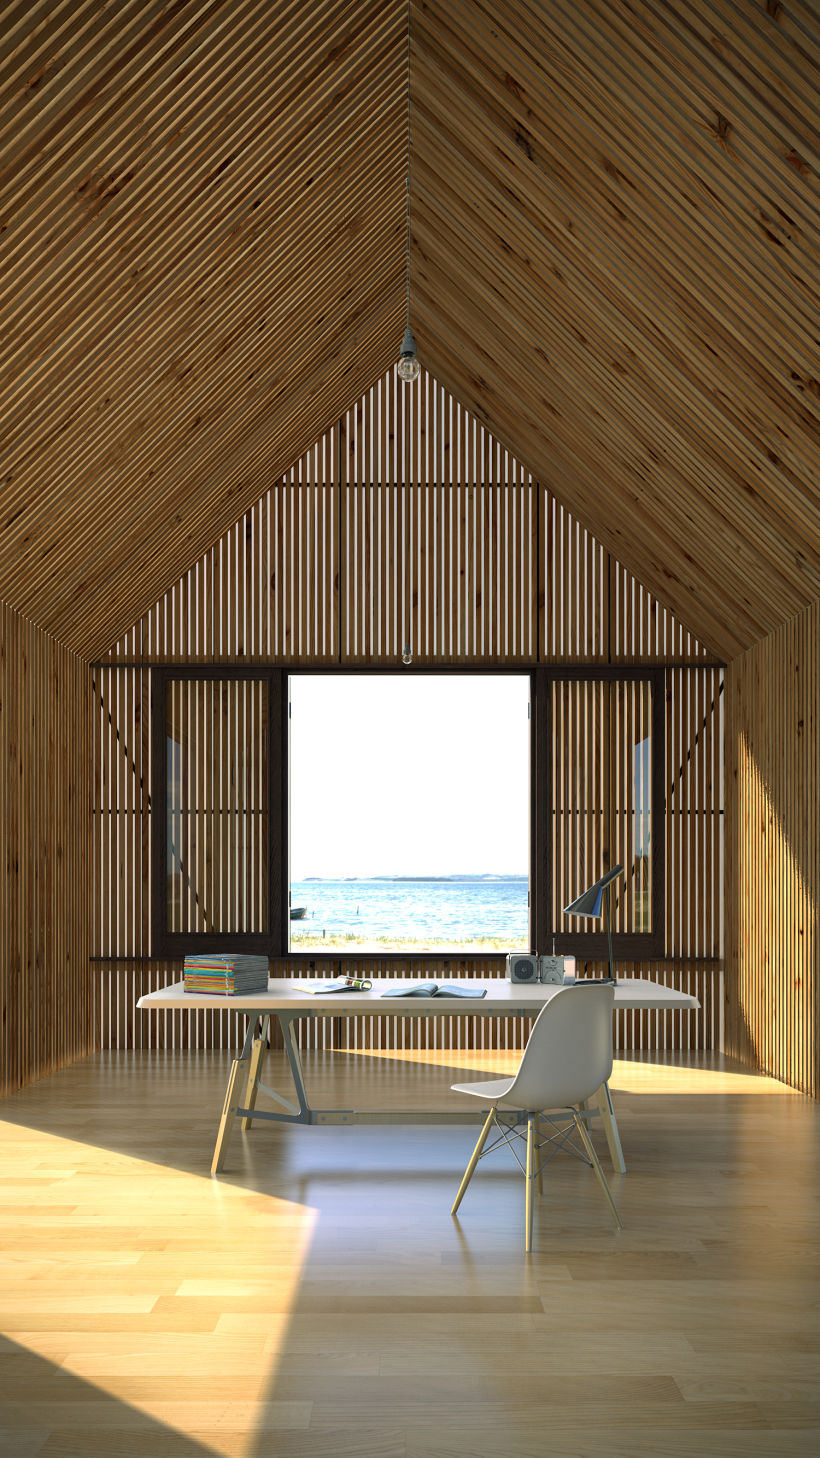 2013 Seaview House, Jackson Clement Burrows Architects. 2